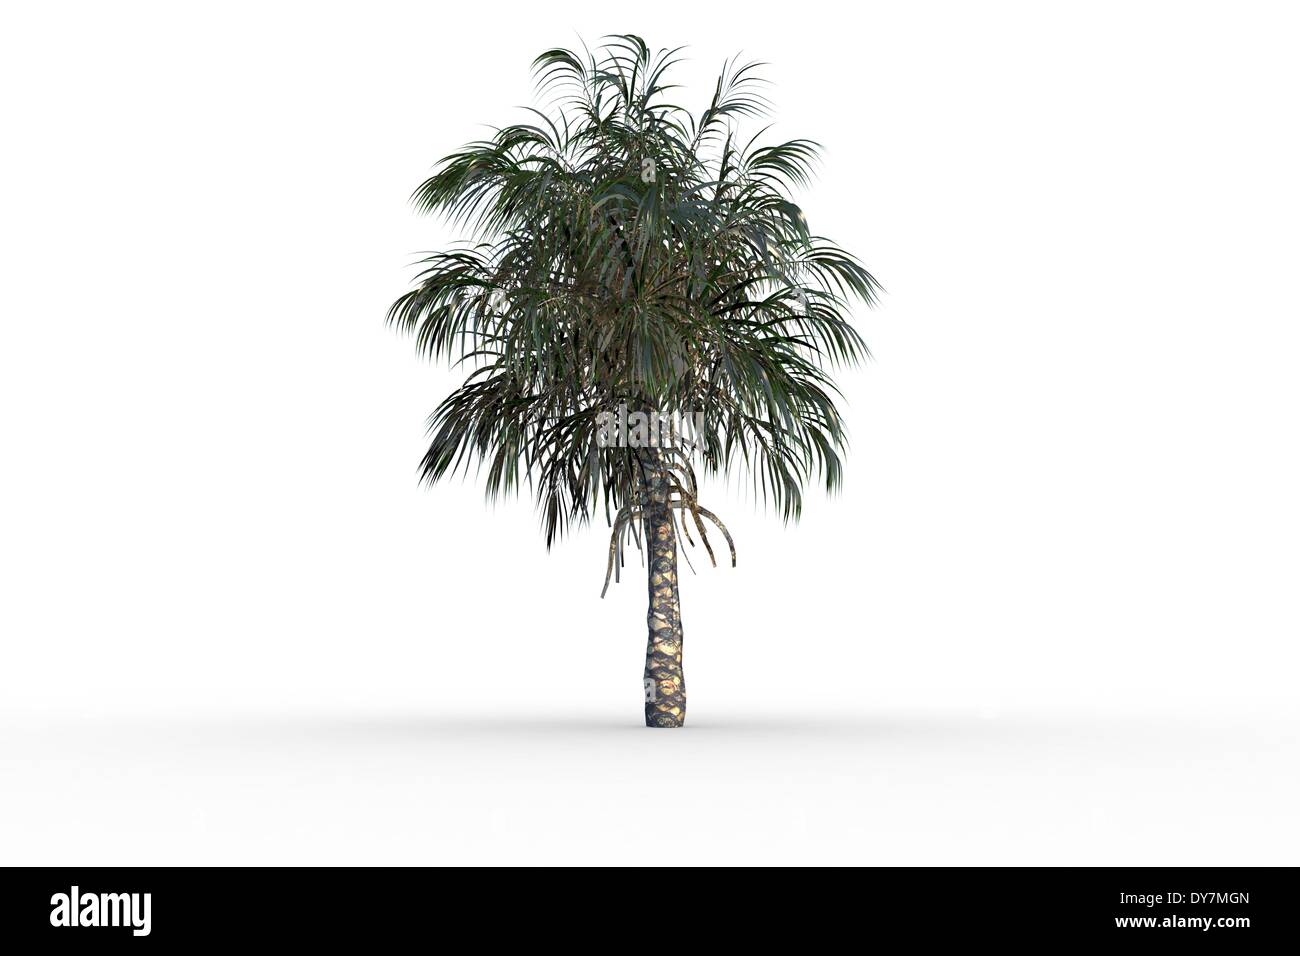 Tropical palm tree with green foilage Stock Photo